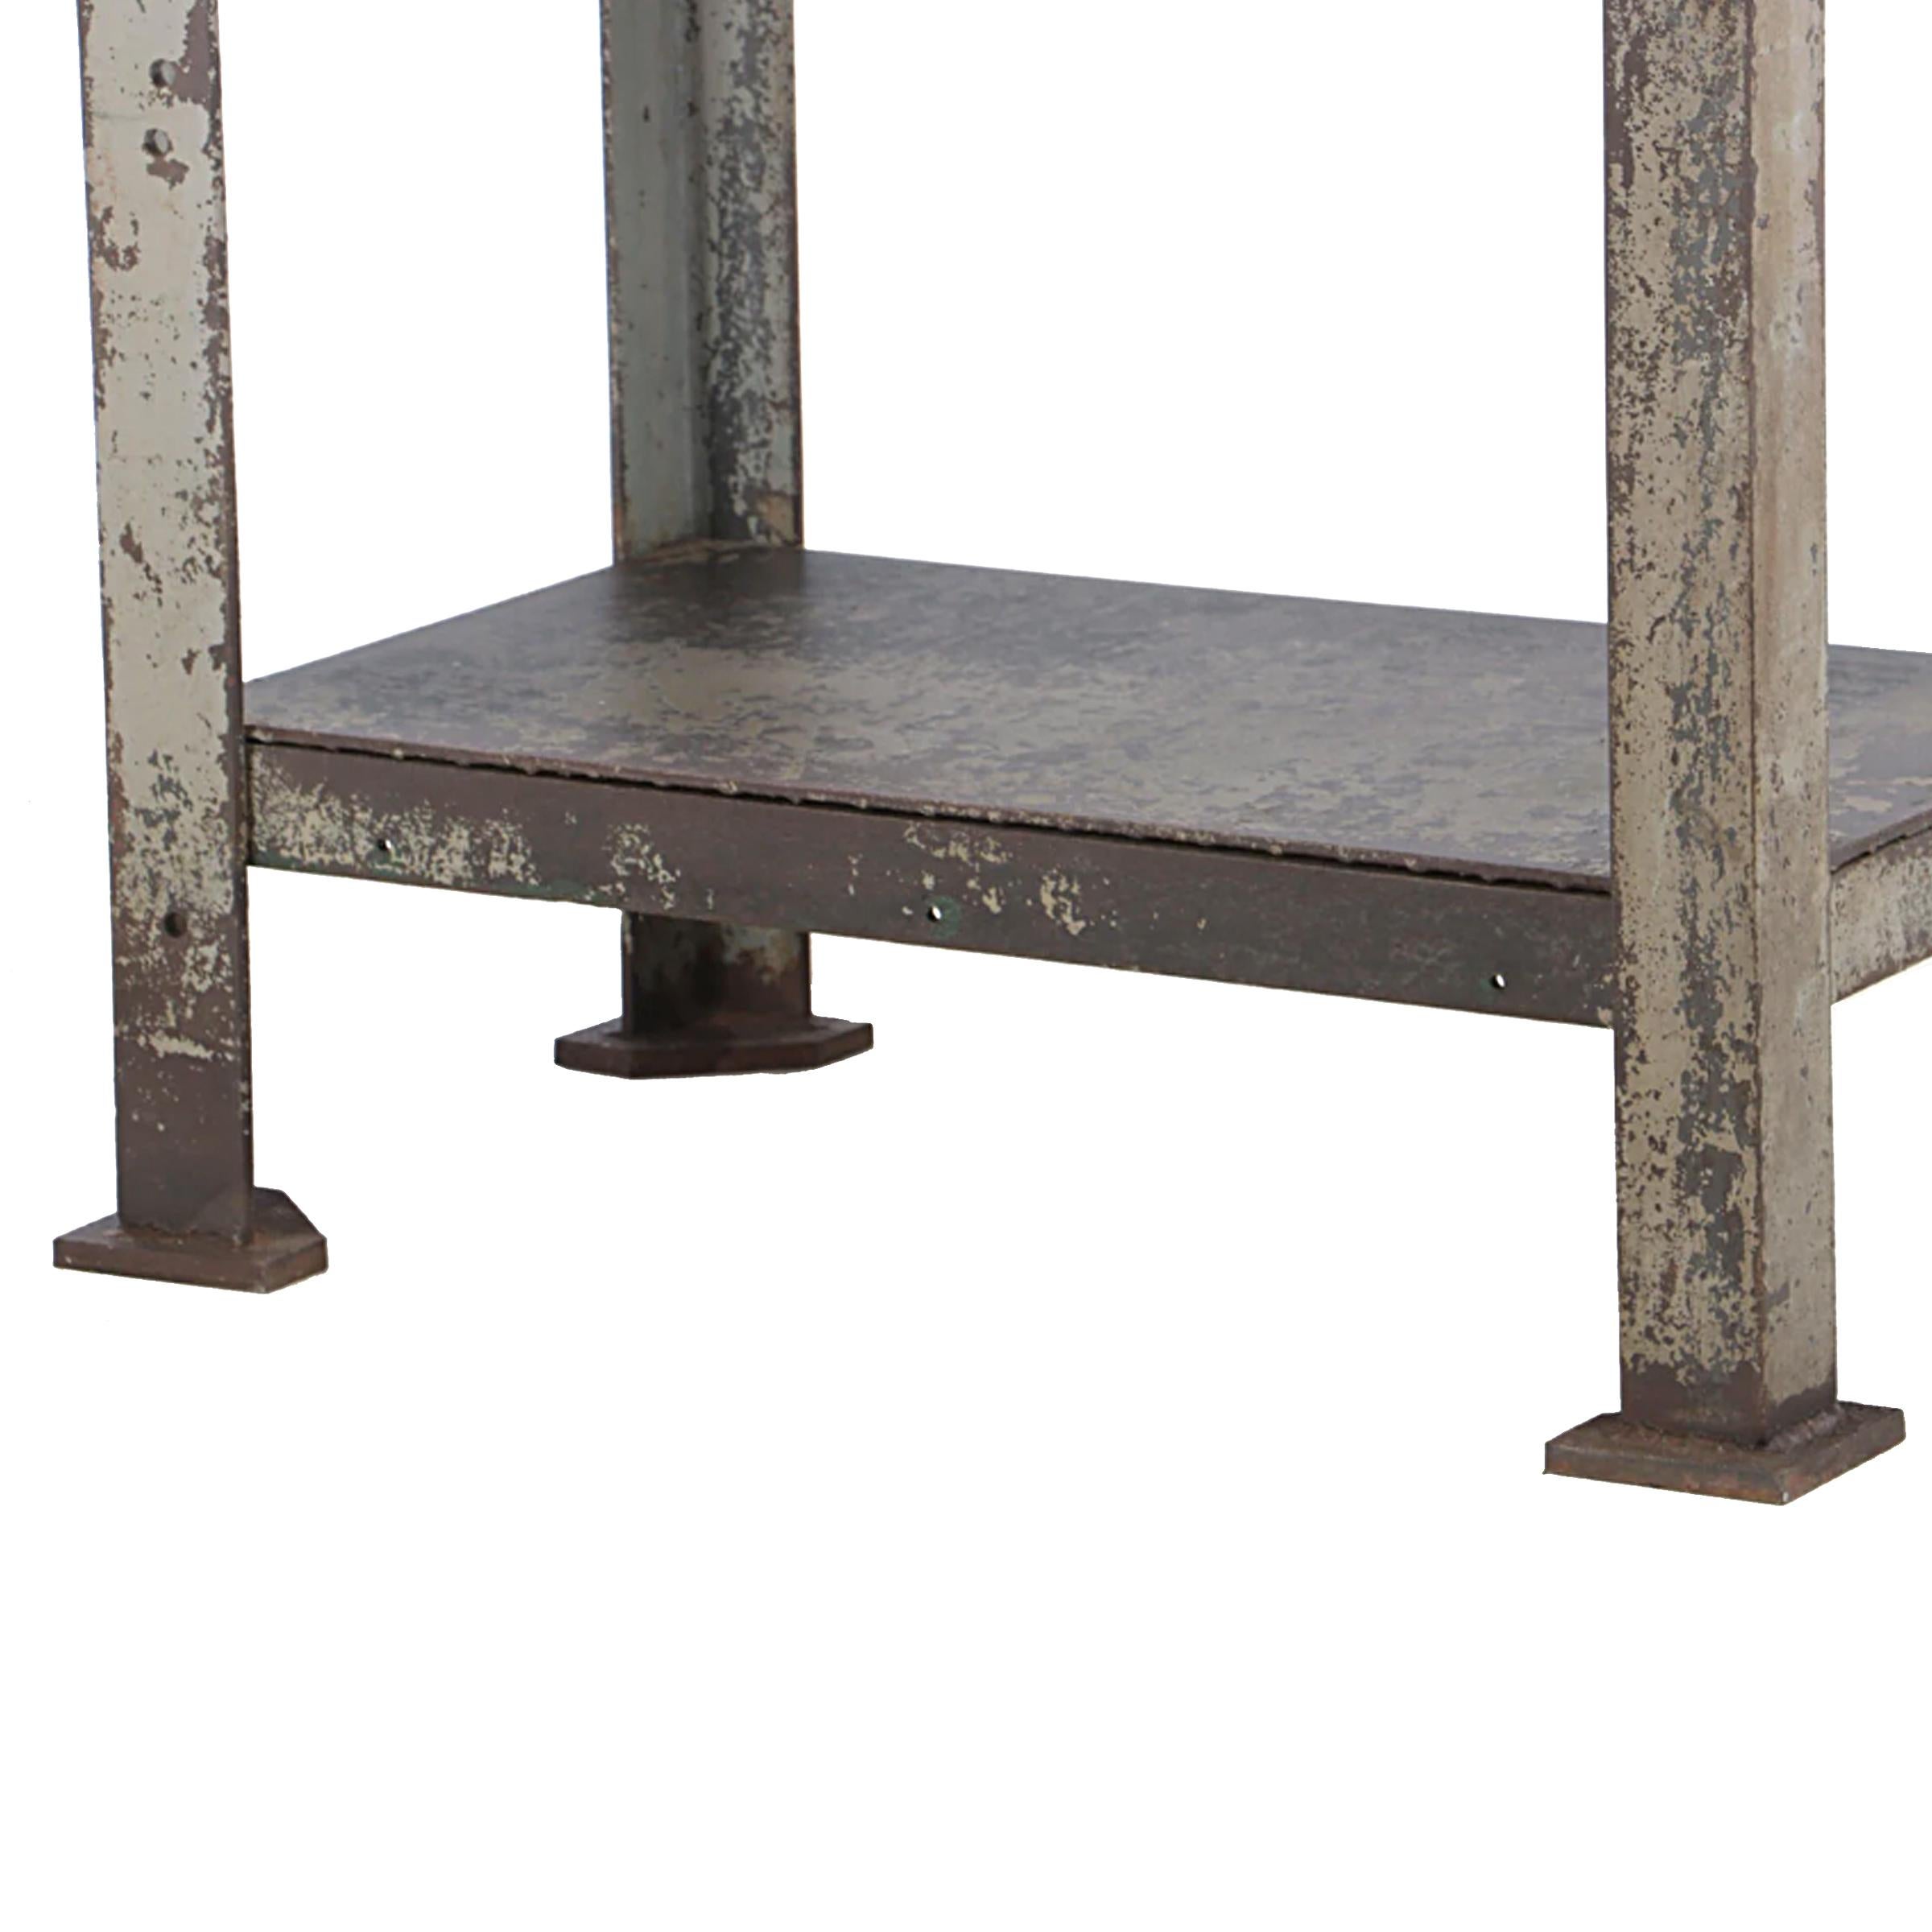 Early 20th Century American Industrial Table 2